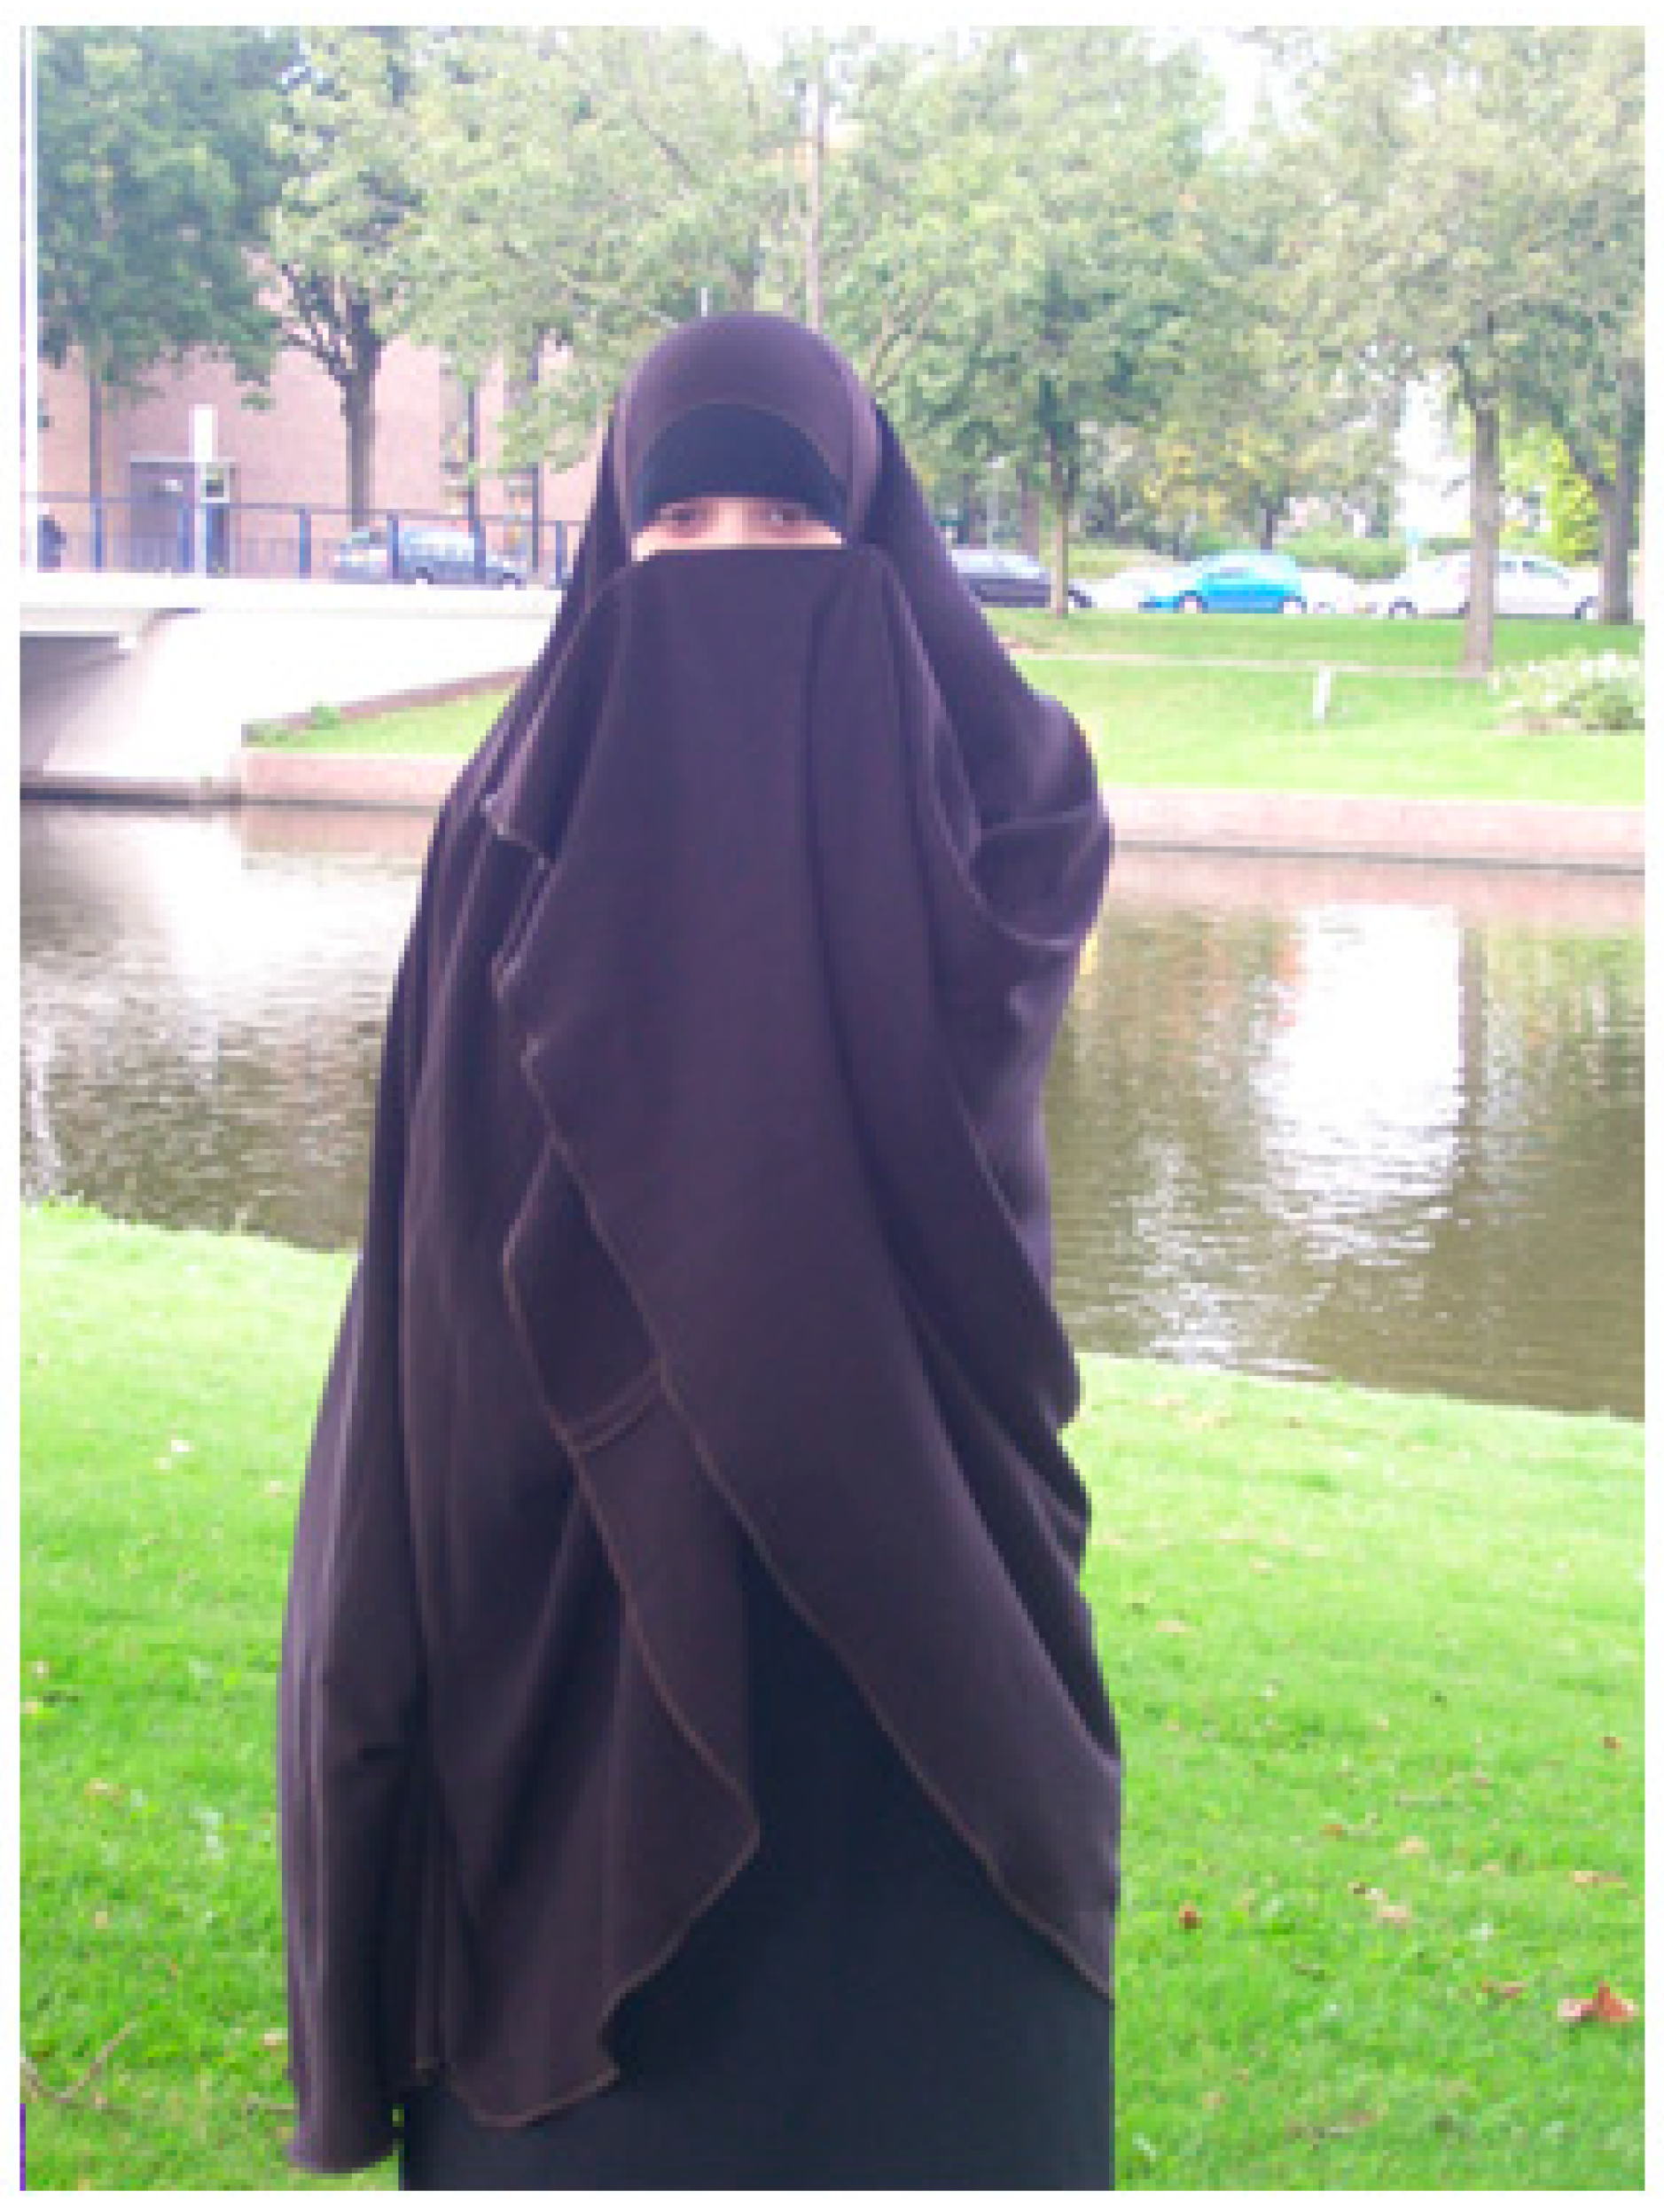 Religions Free Full-Text The Burka Ban Islamic Dress, Freedom and Choice in The Netherlands in Light of the 2019 Burka Ban